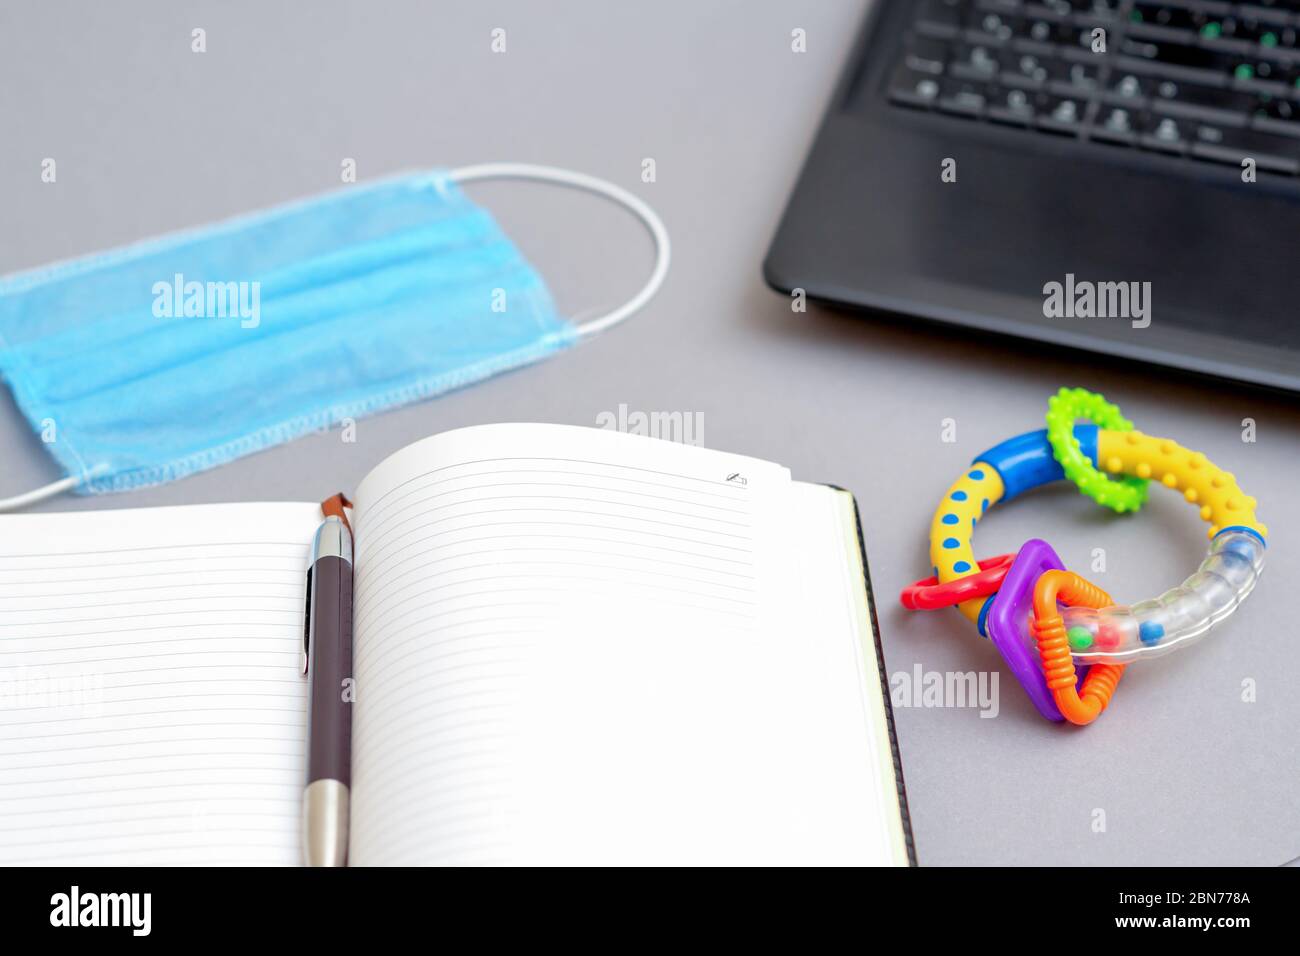 Protective medical mask near the laptop and pen with open notebook and rattle toy on gray background. Concept of working from home. Stock Photo